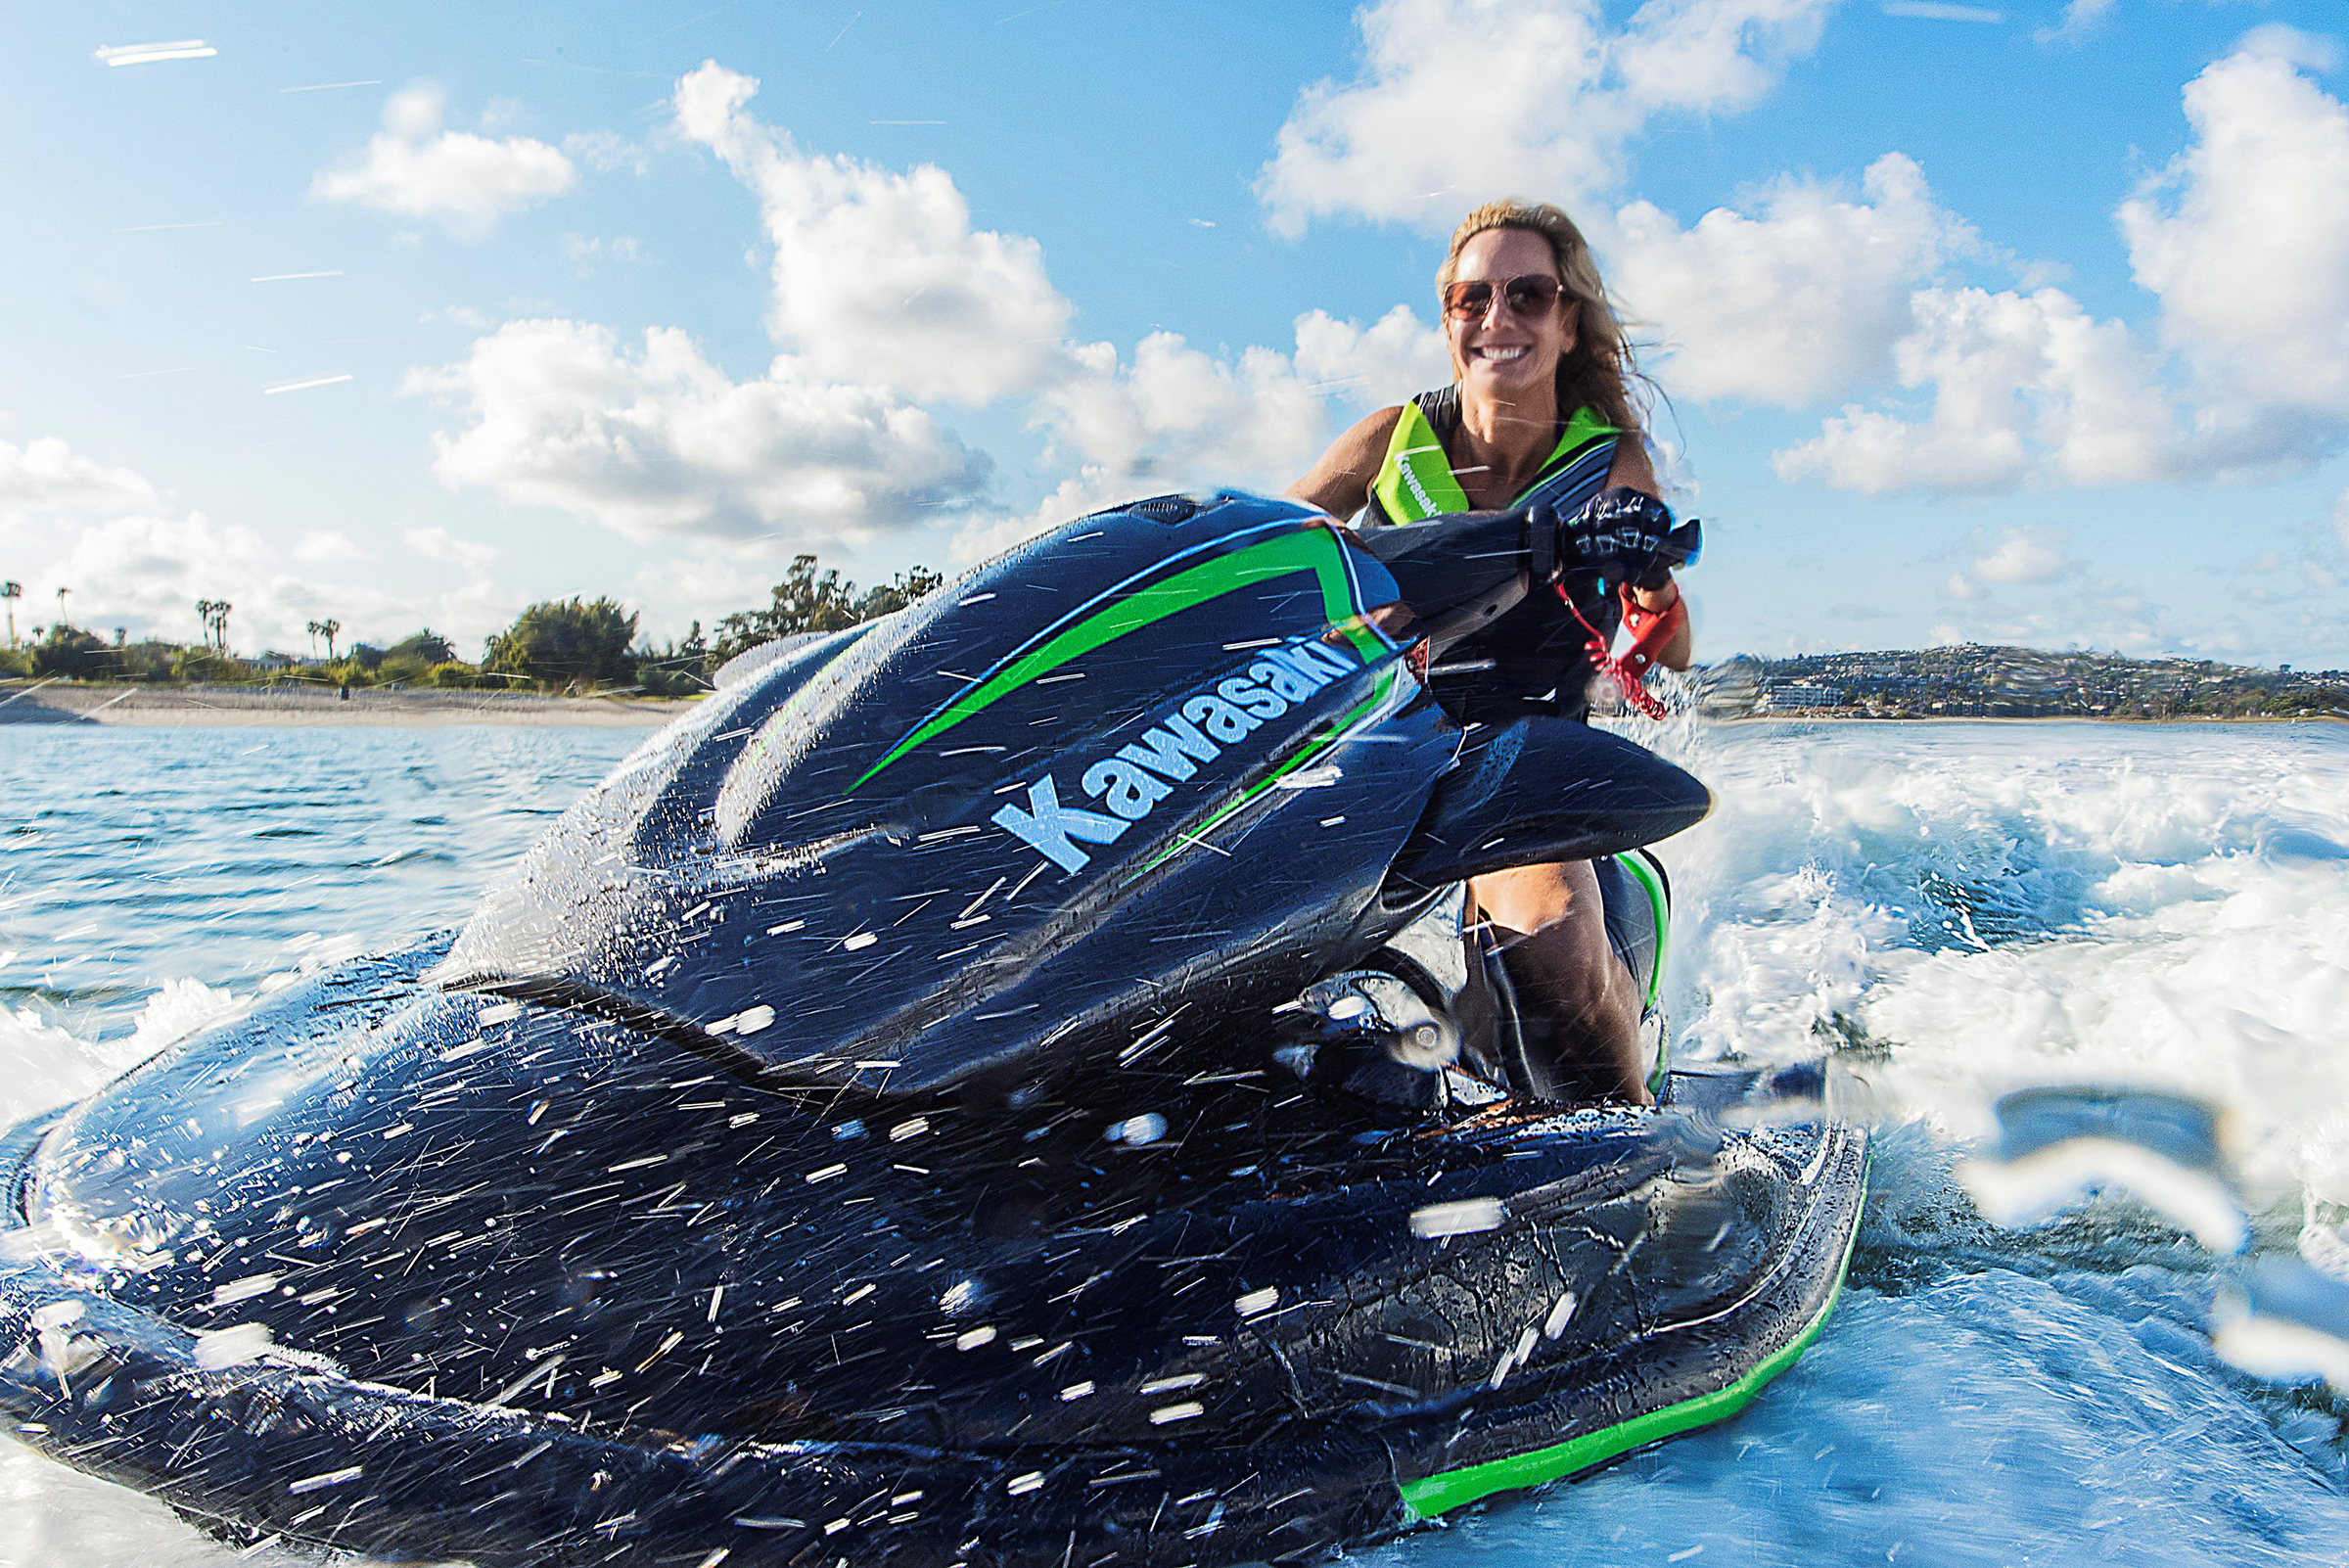 Wake Jumpers: The 4 Best Jet Skis in 2020